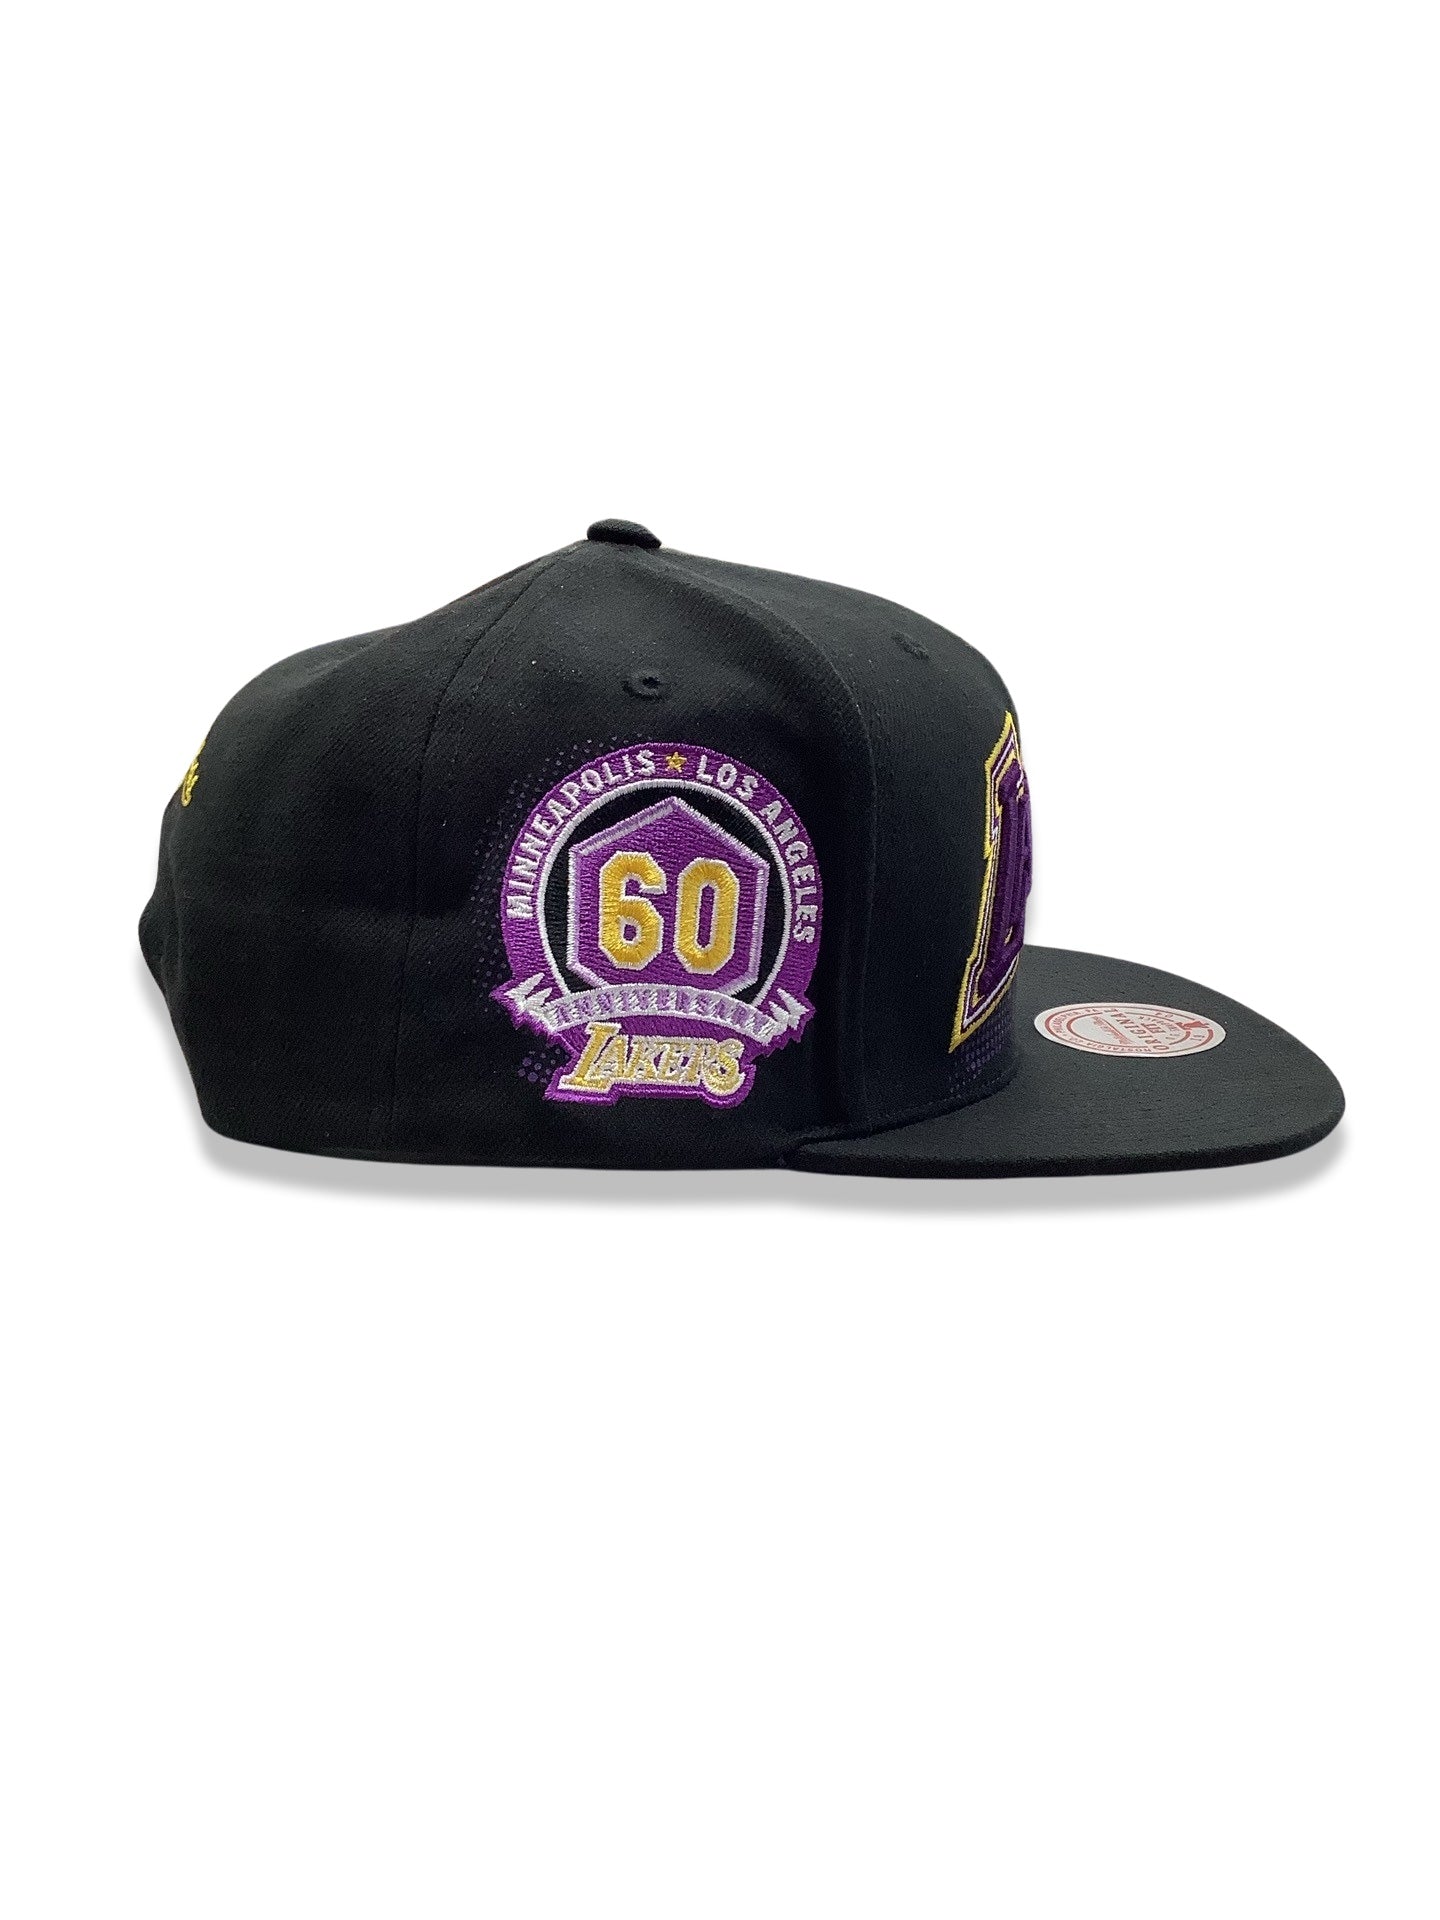 Mitchell n ness Los angeles Lakers